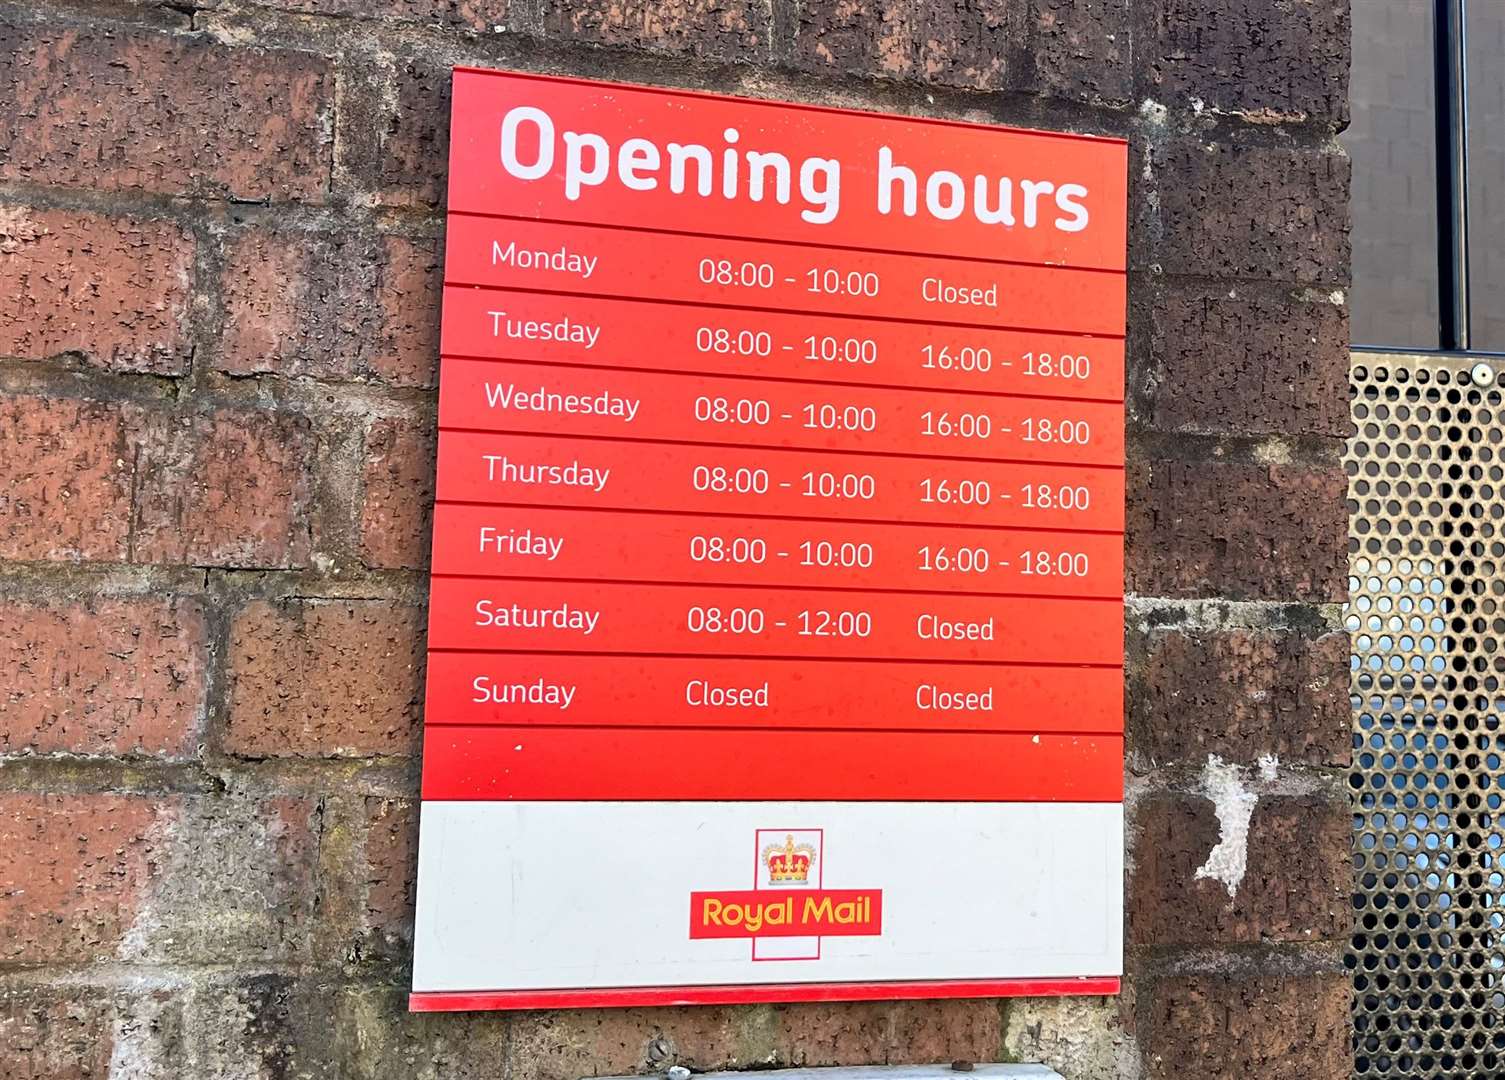 Opening hours were slashed at the site last year